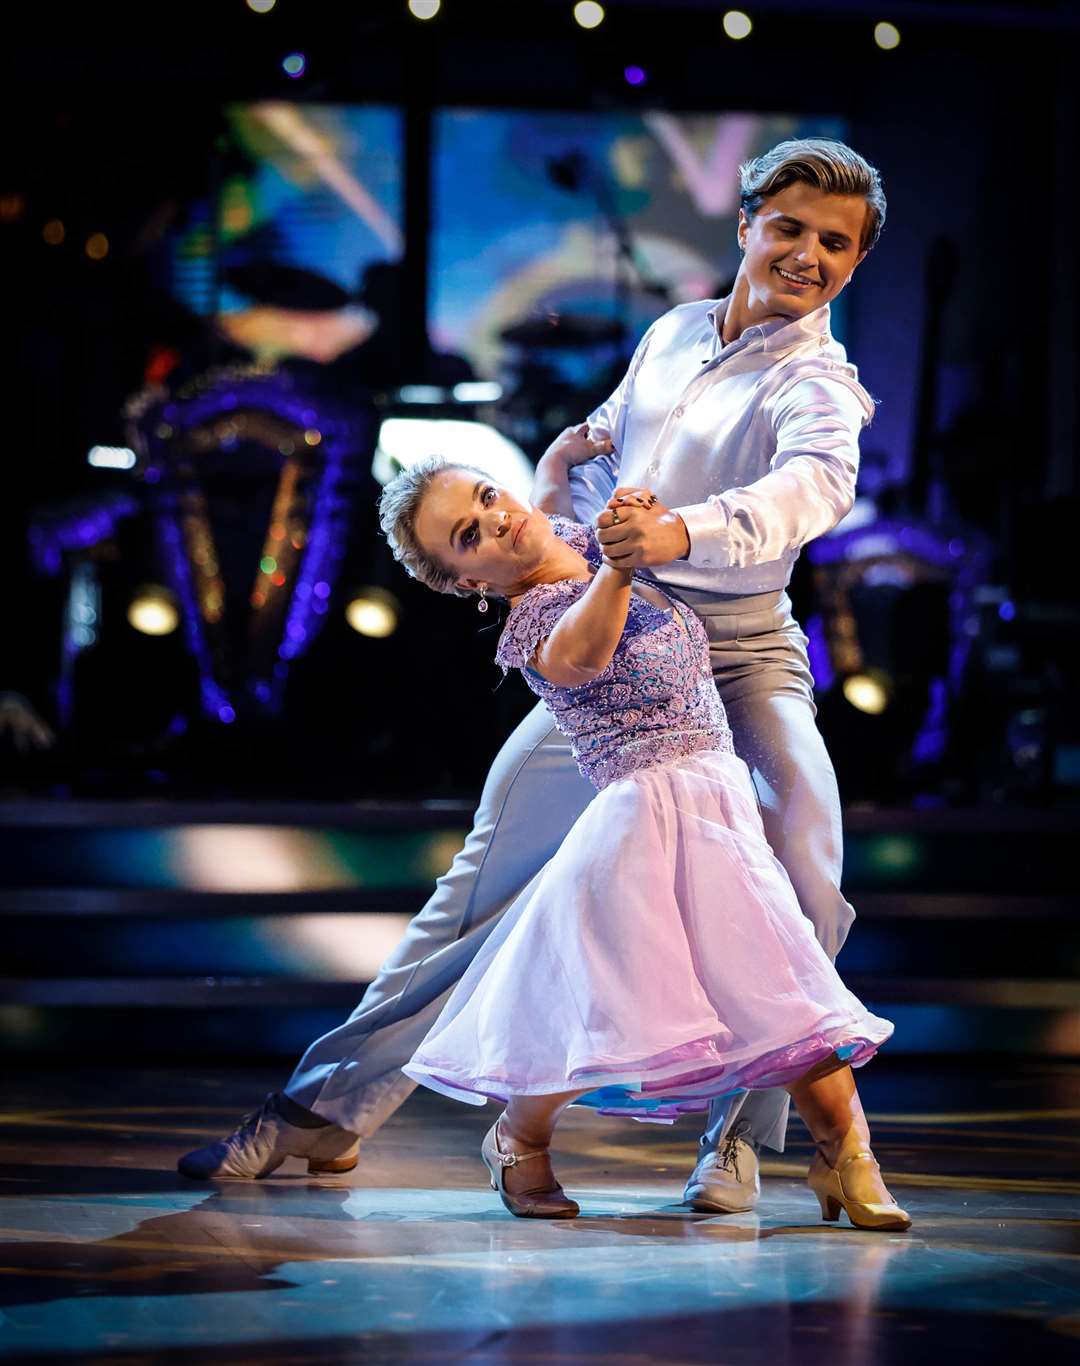 Ellie Simmonds and her professional partner Nikita Kuzmin on Strictly Come Dancing (Guy Levy/BBC/PA)